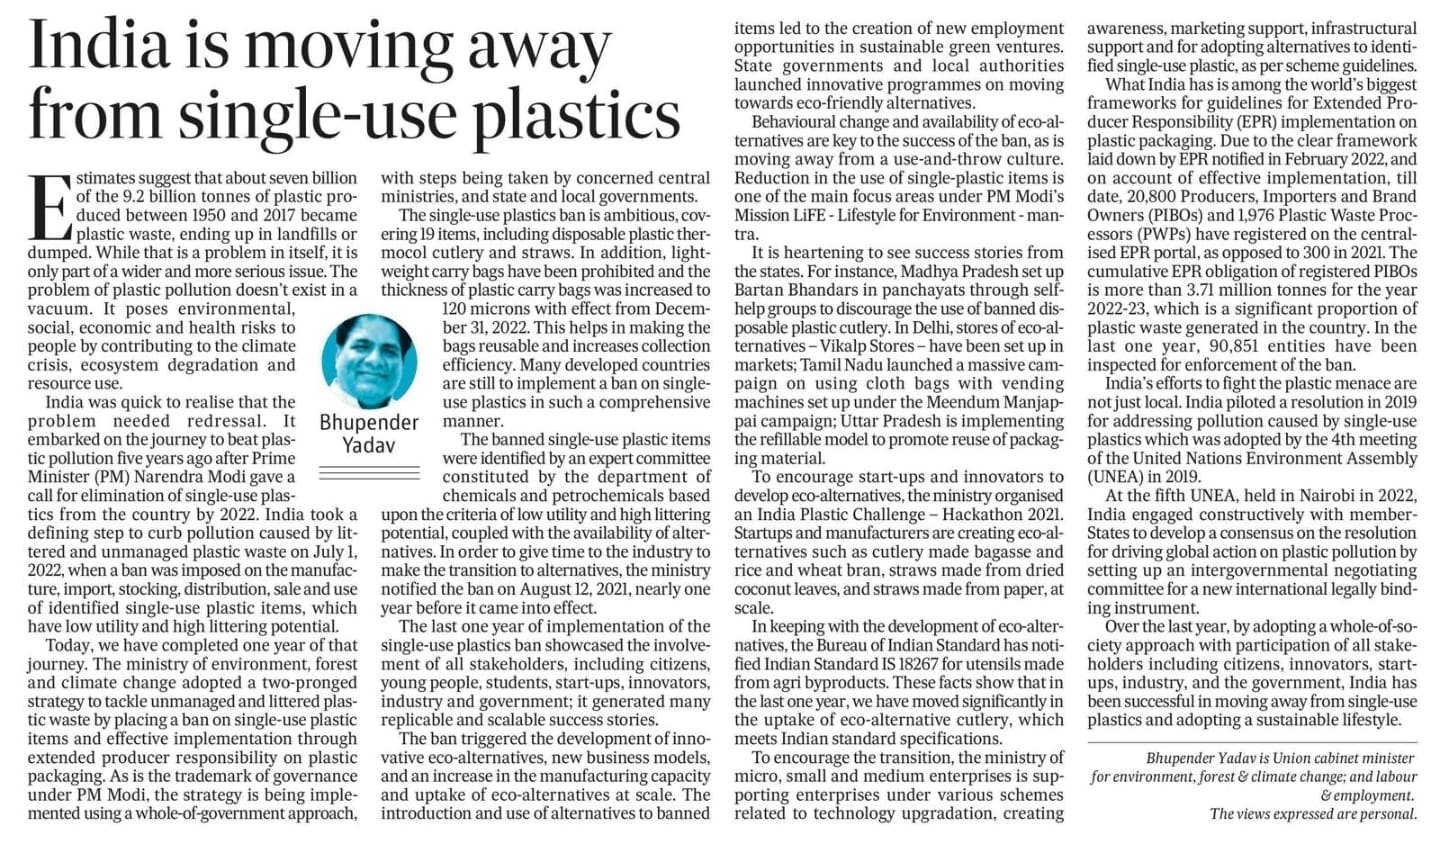 India is moving away from single-use plastics